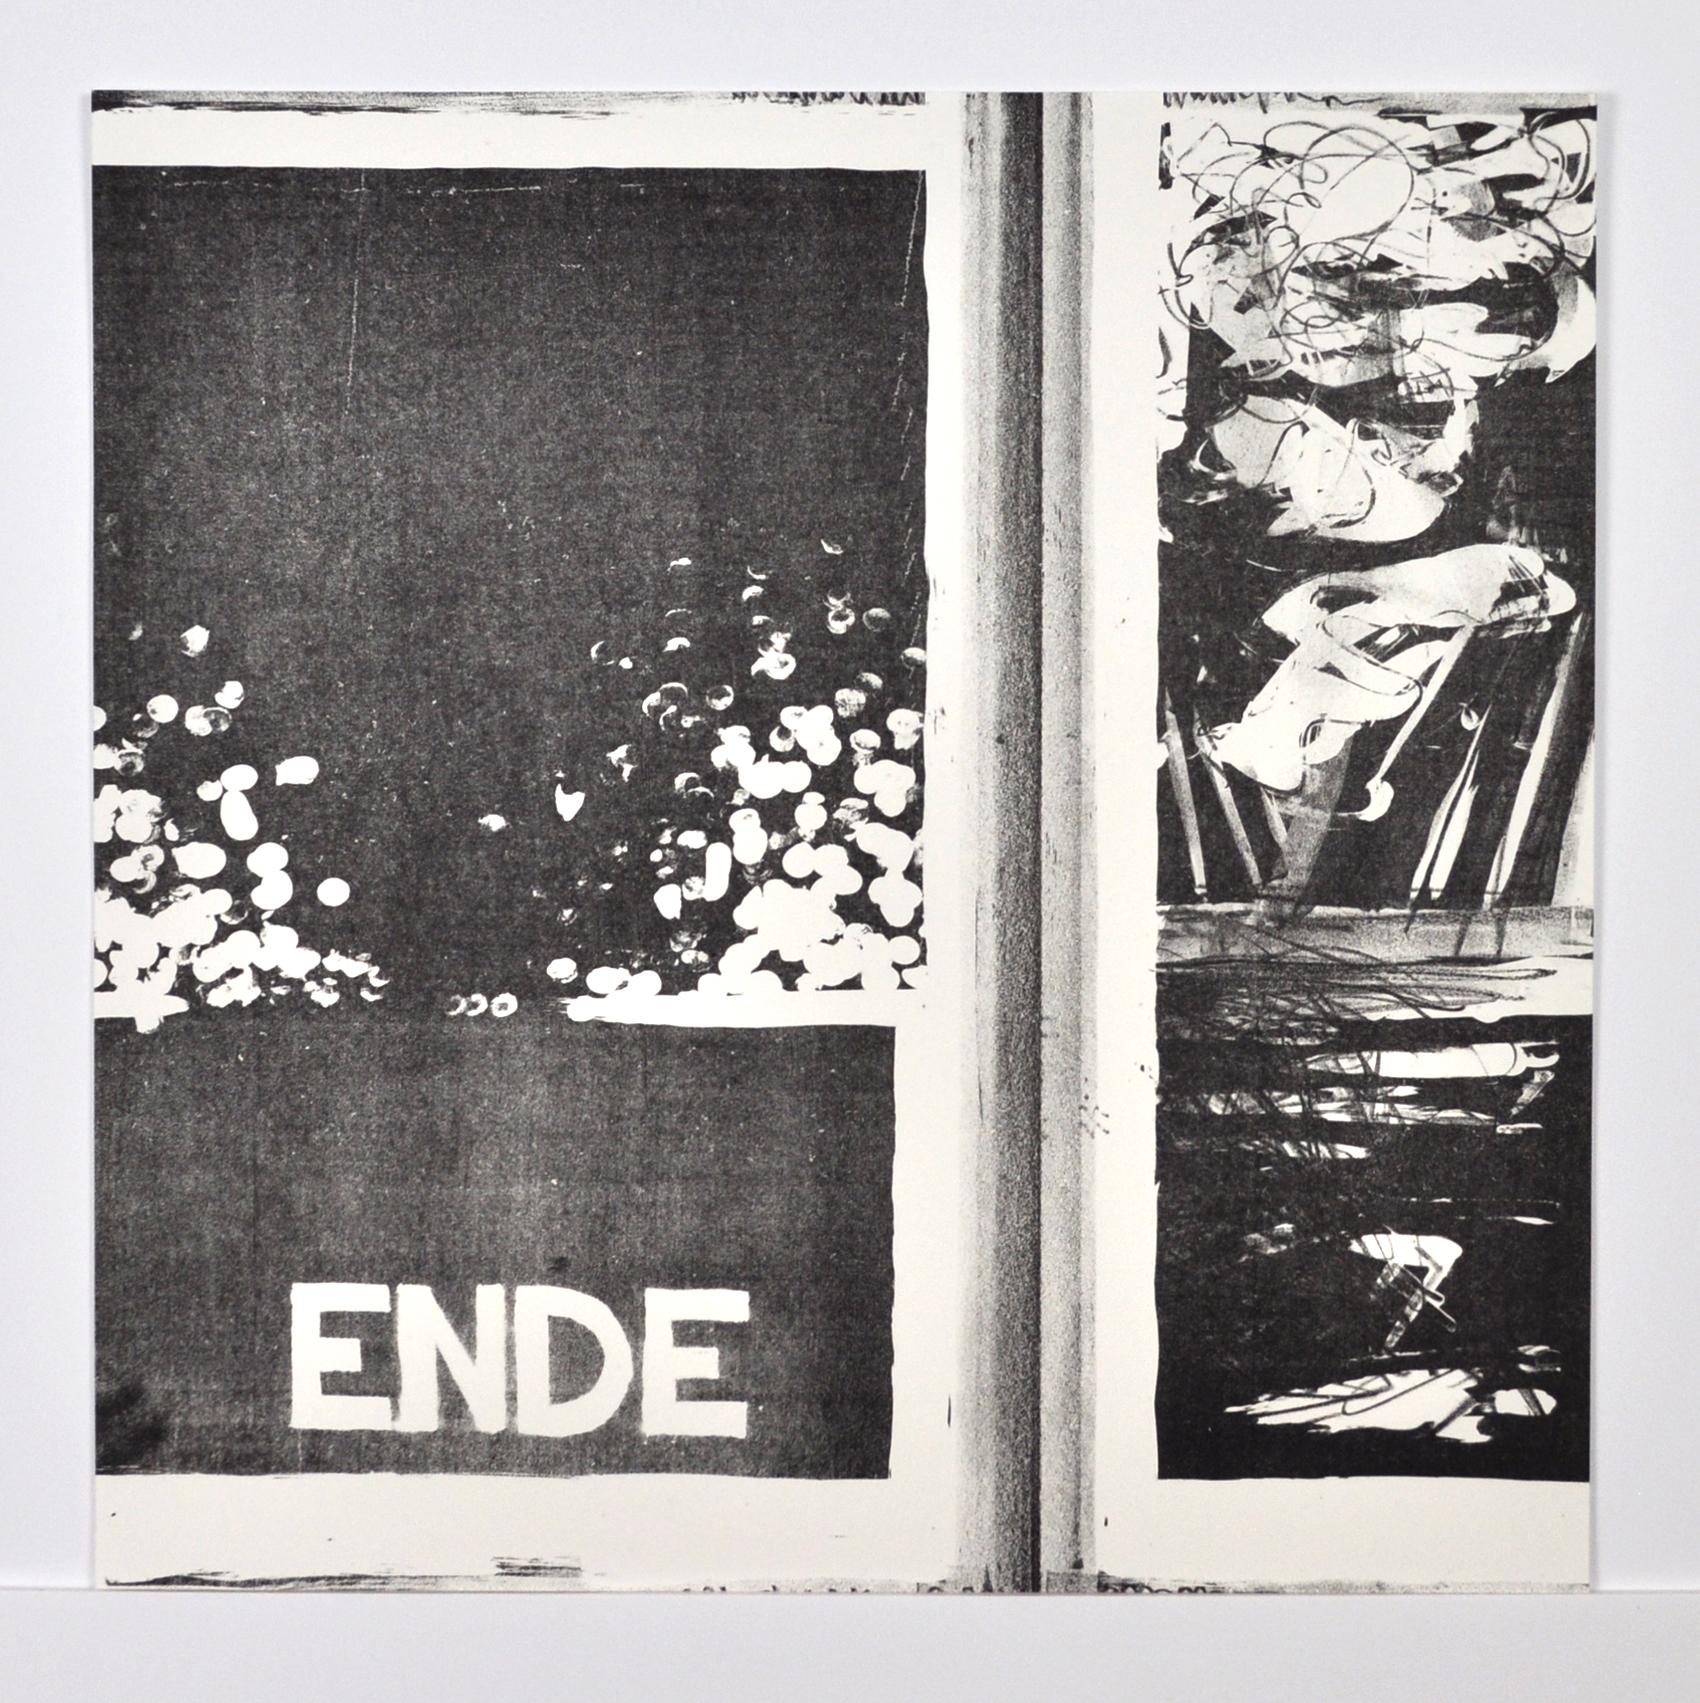 Scandinavian Lithograph “Ende”, Numbered and signed - Abstract Print by Claus Handgaard Jørgensen